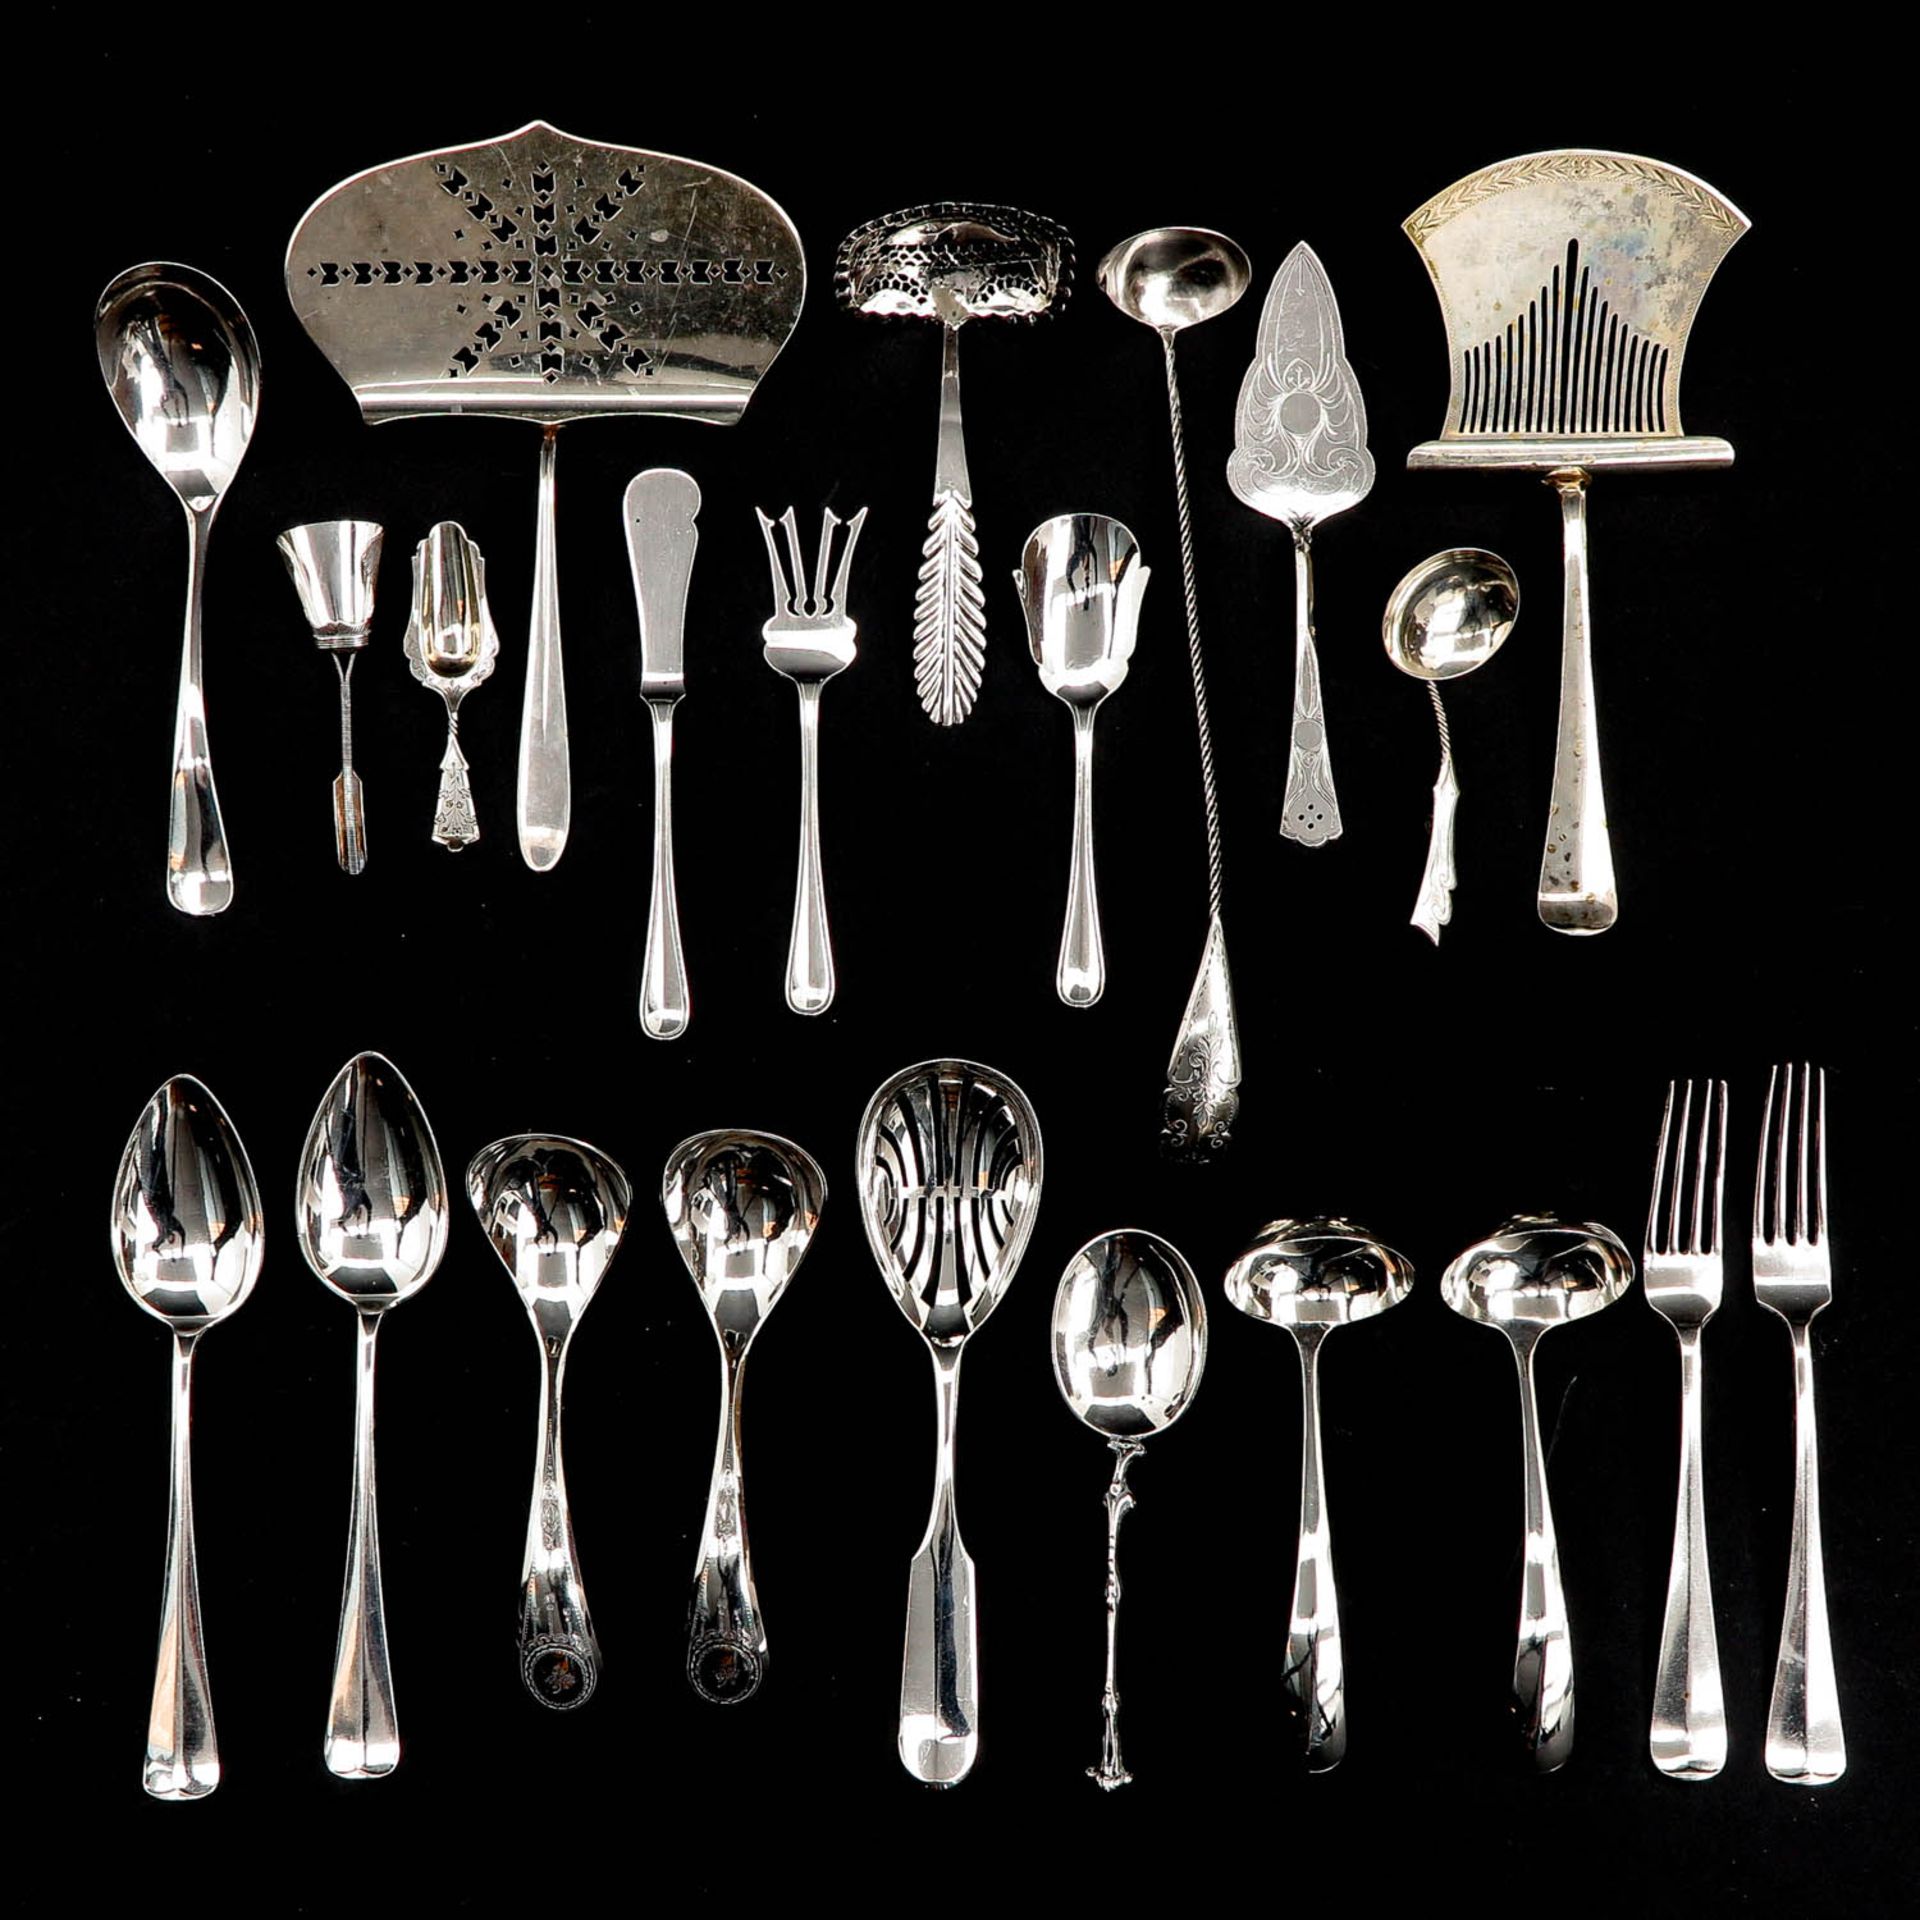 A Diverse Collection of Cutlery